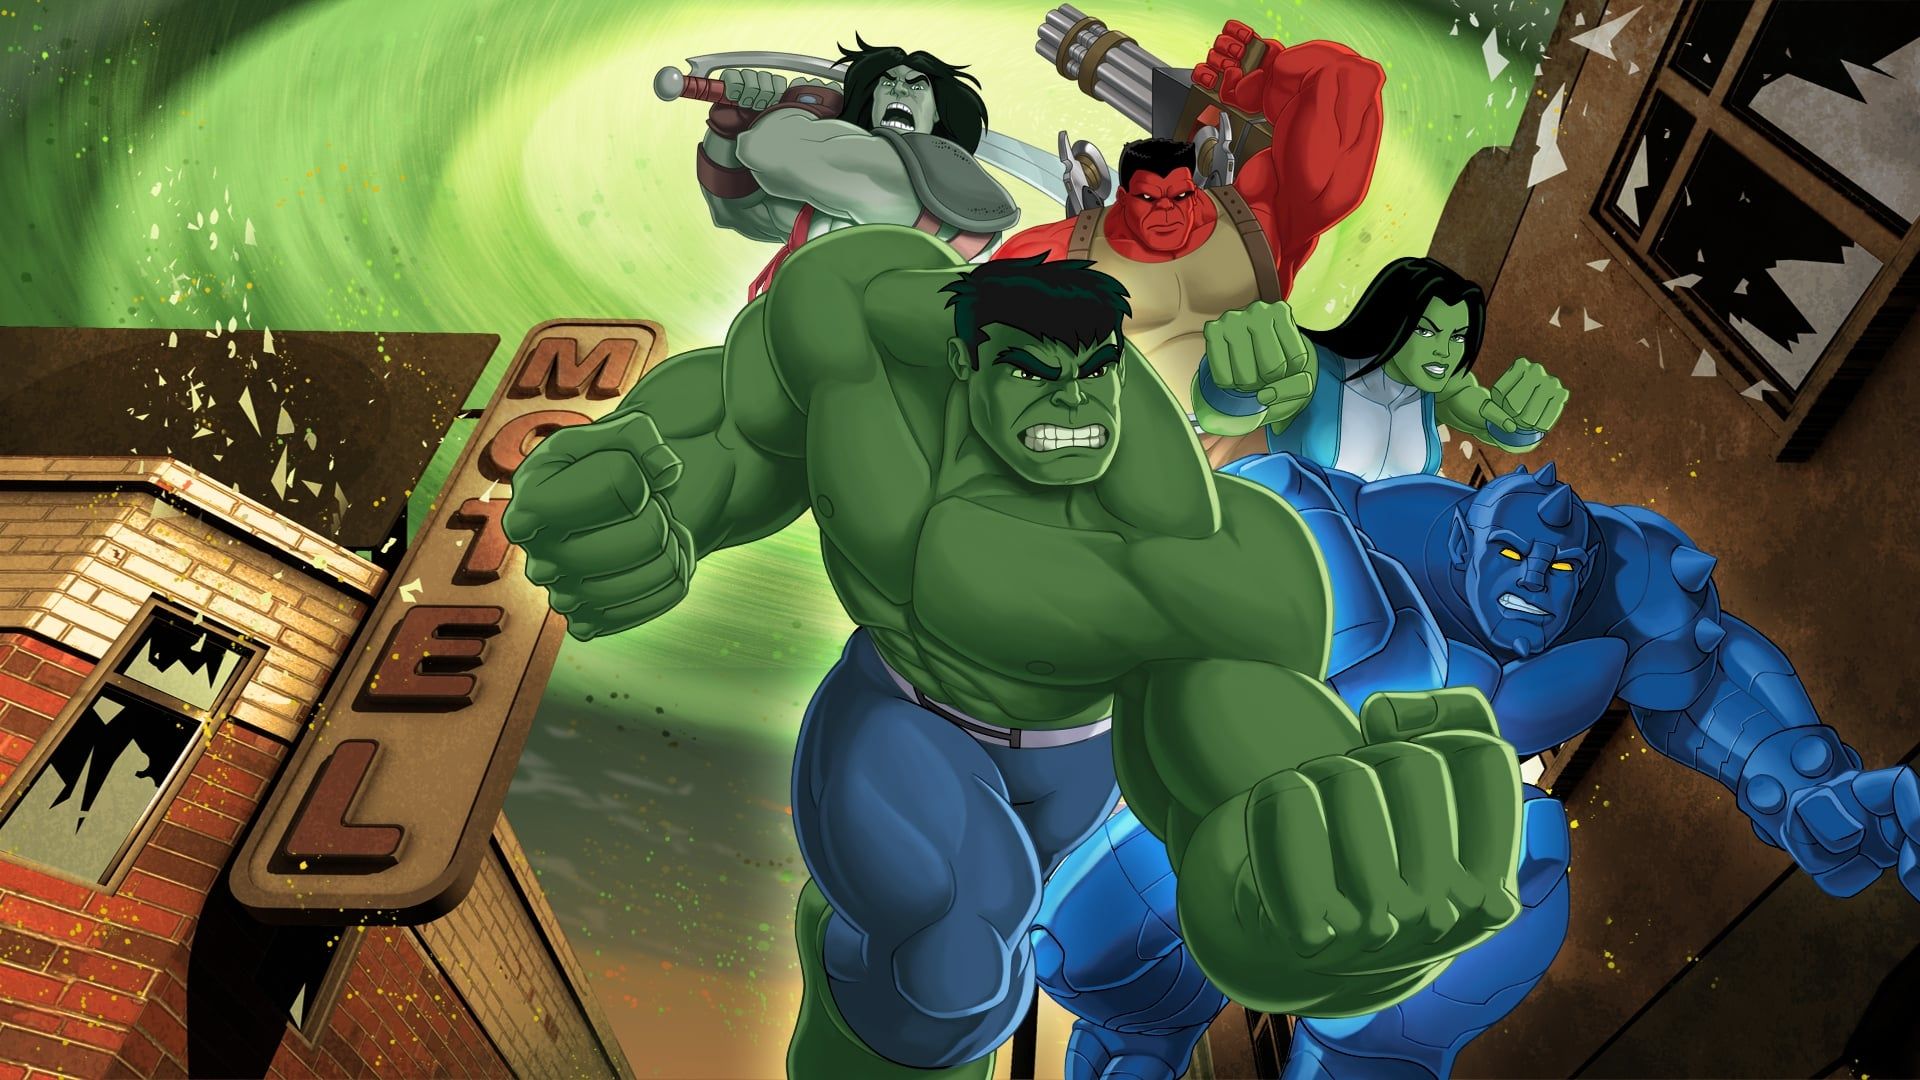 Hulk and the Agents of S.M.A.S.H. Backdrop